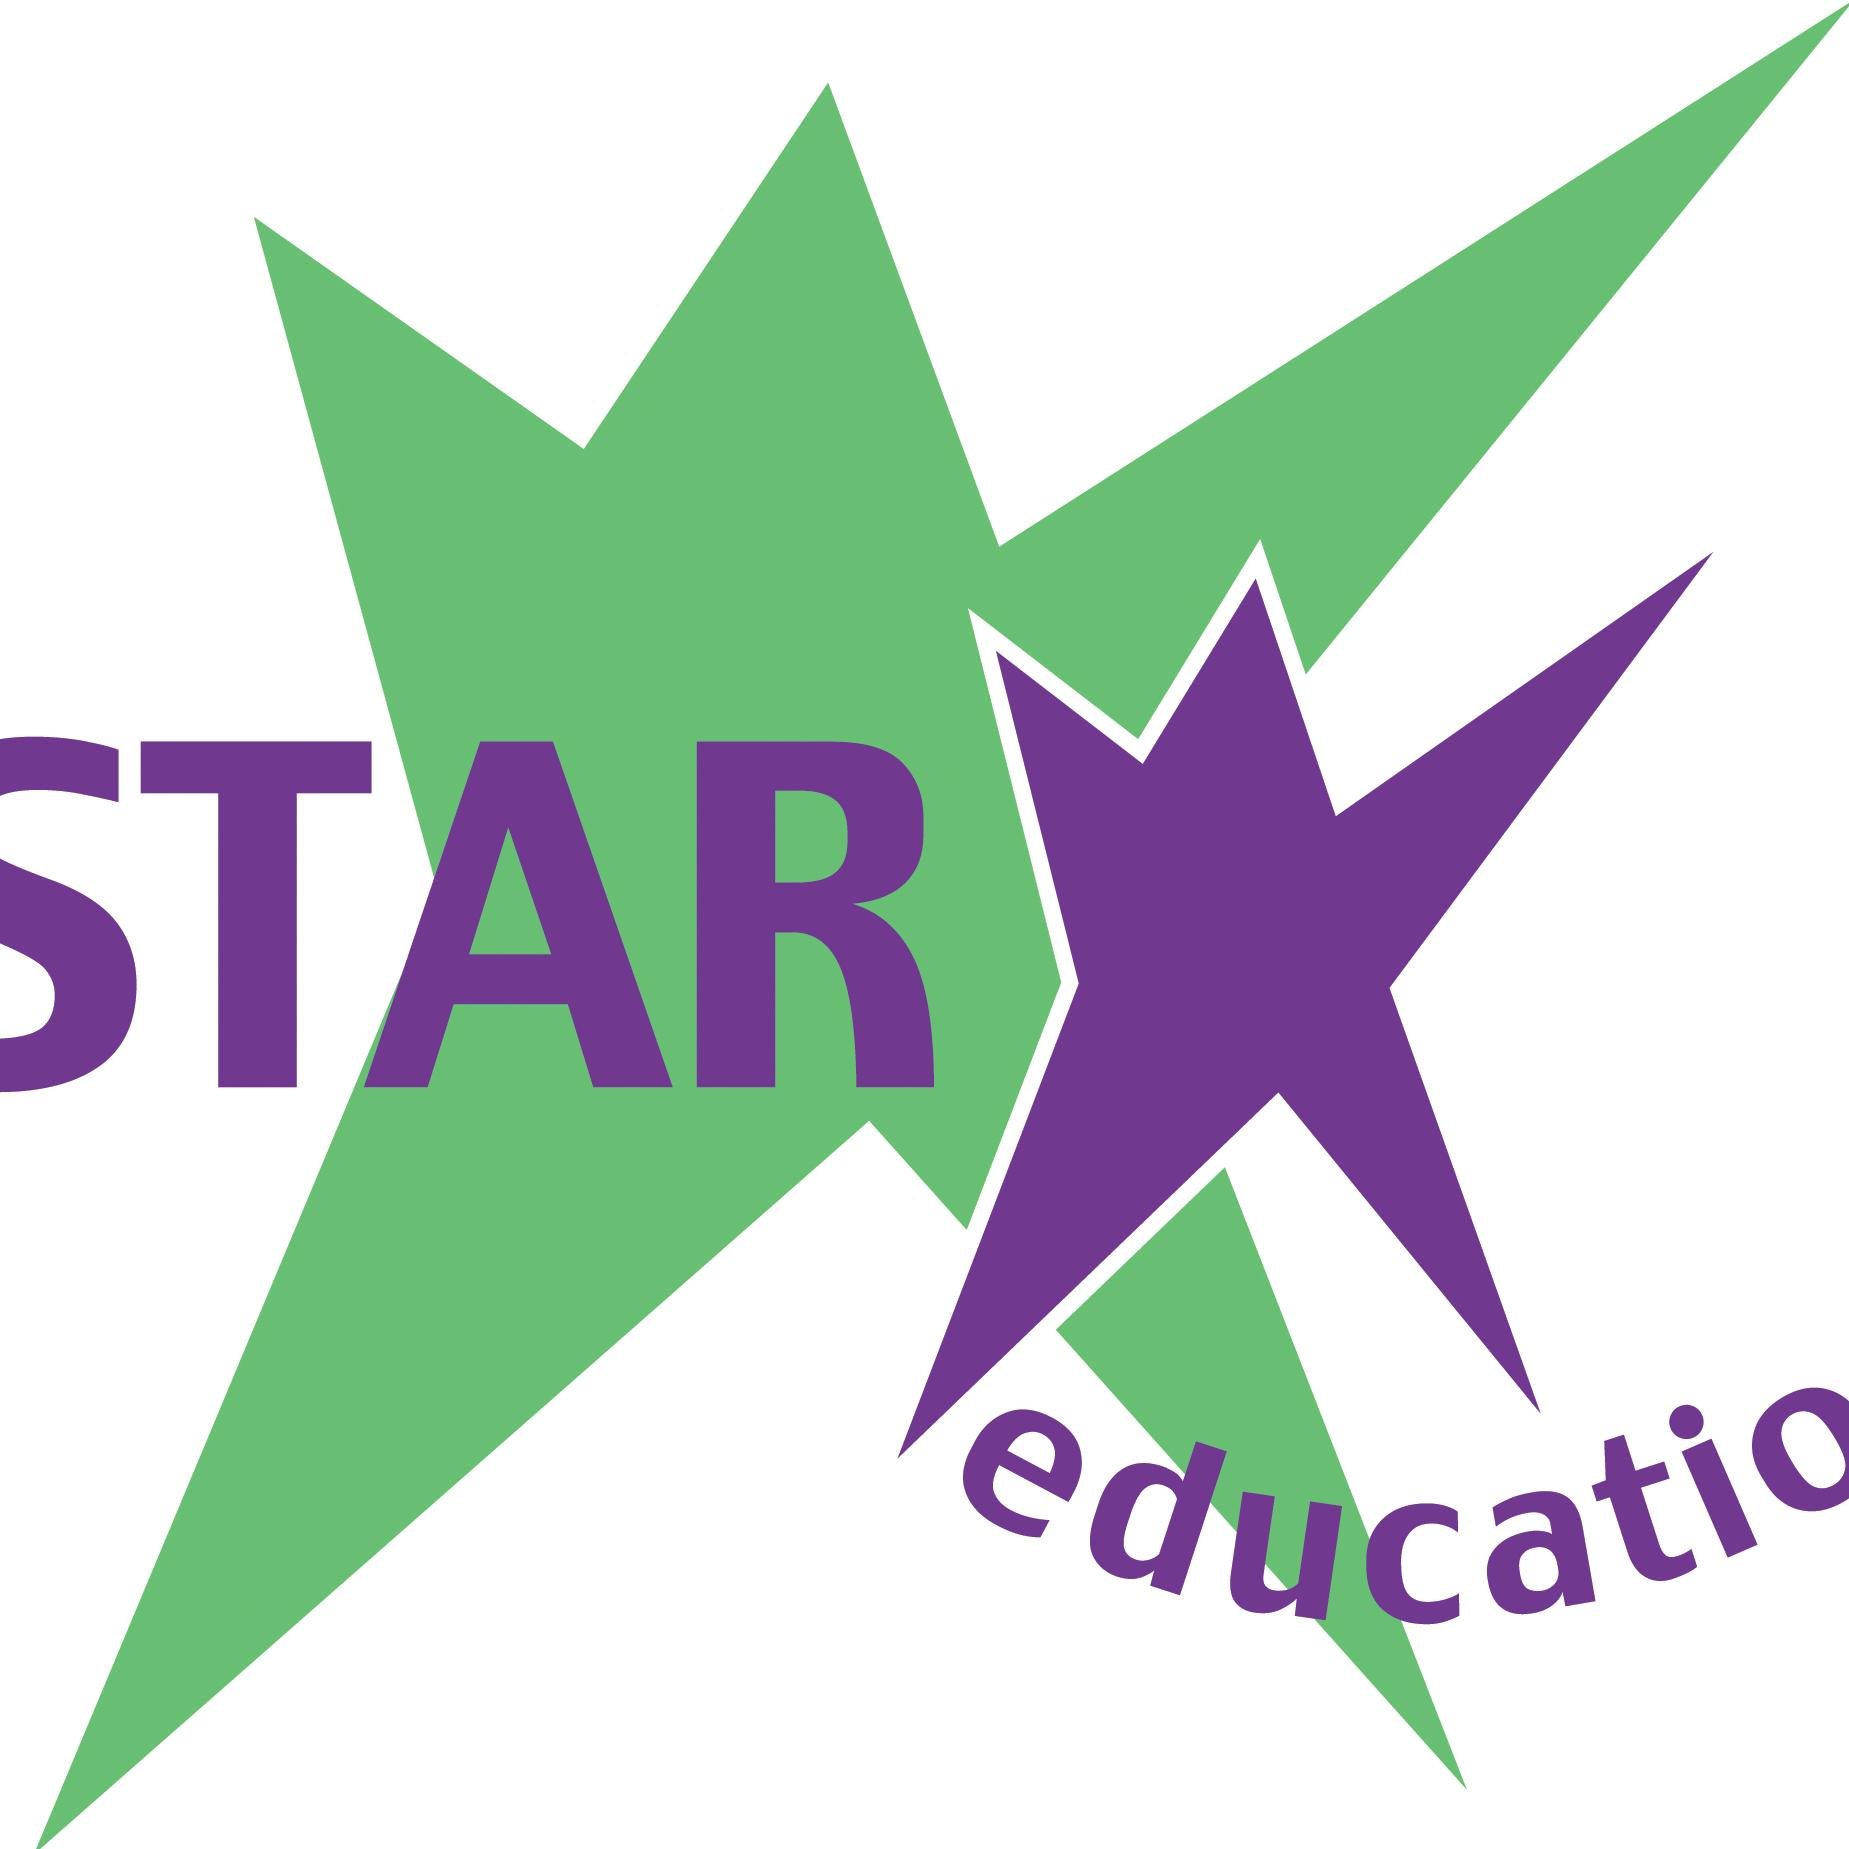 STAR is a leader in afterschool programming and community cultural enrichment projects, connecting kids to resources needed to engage, learn & achieve for life!